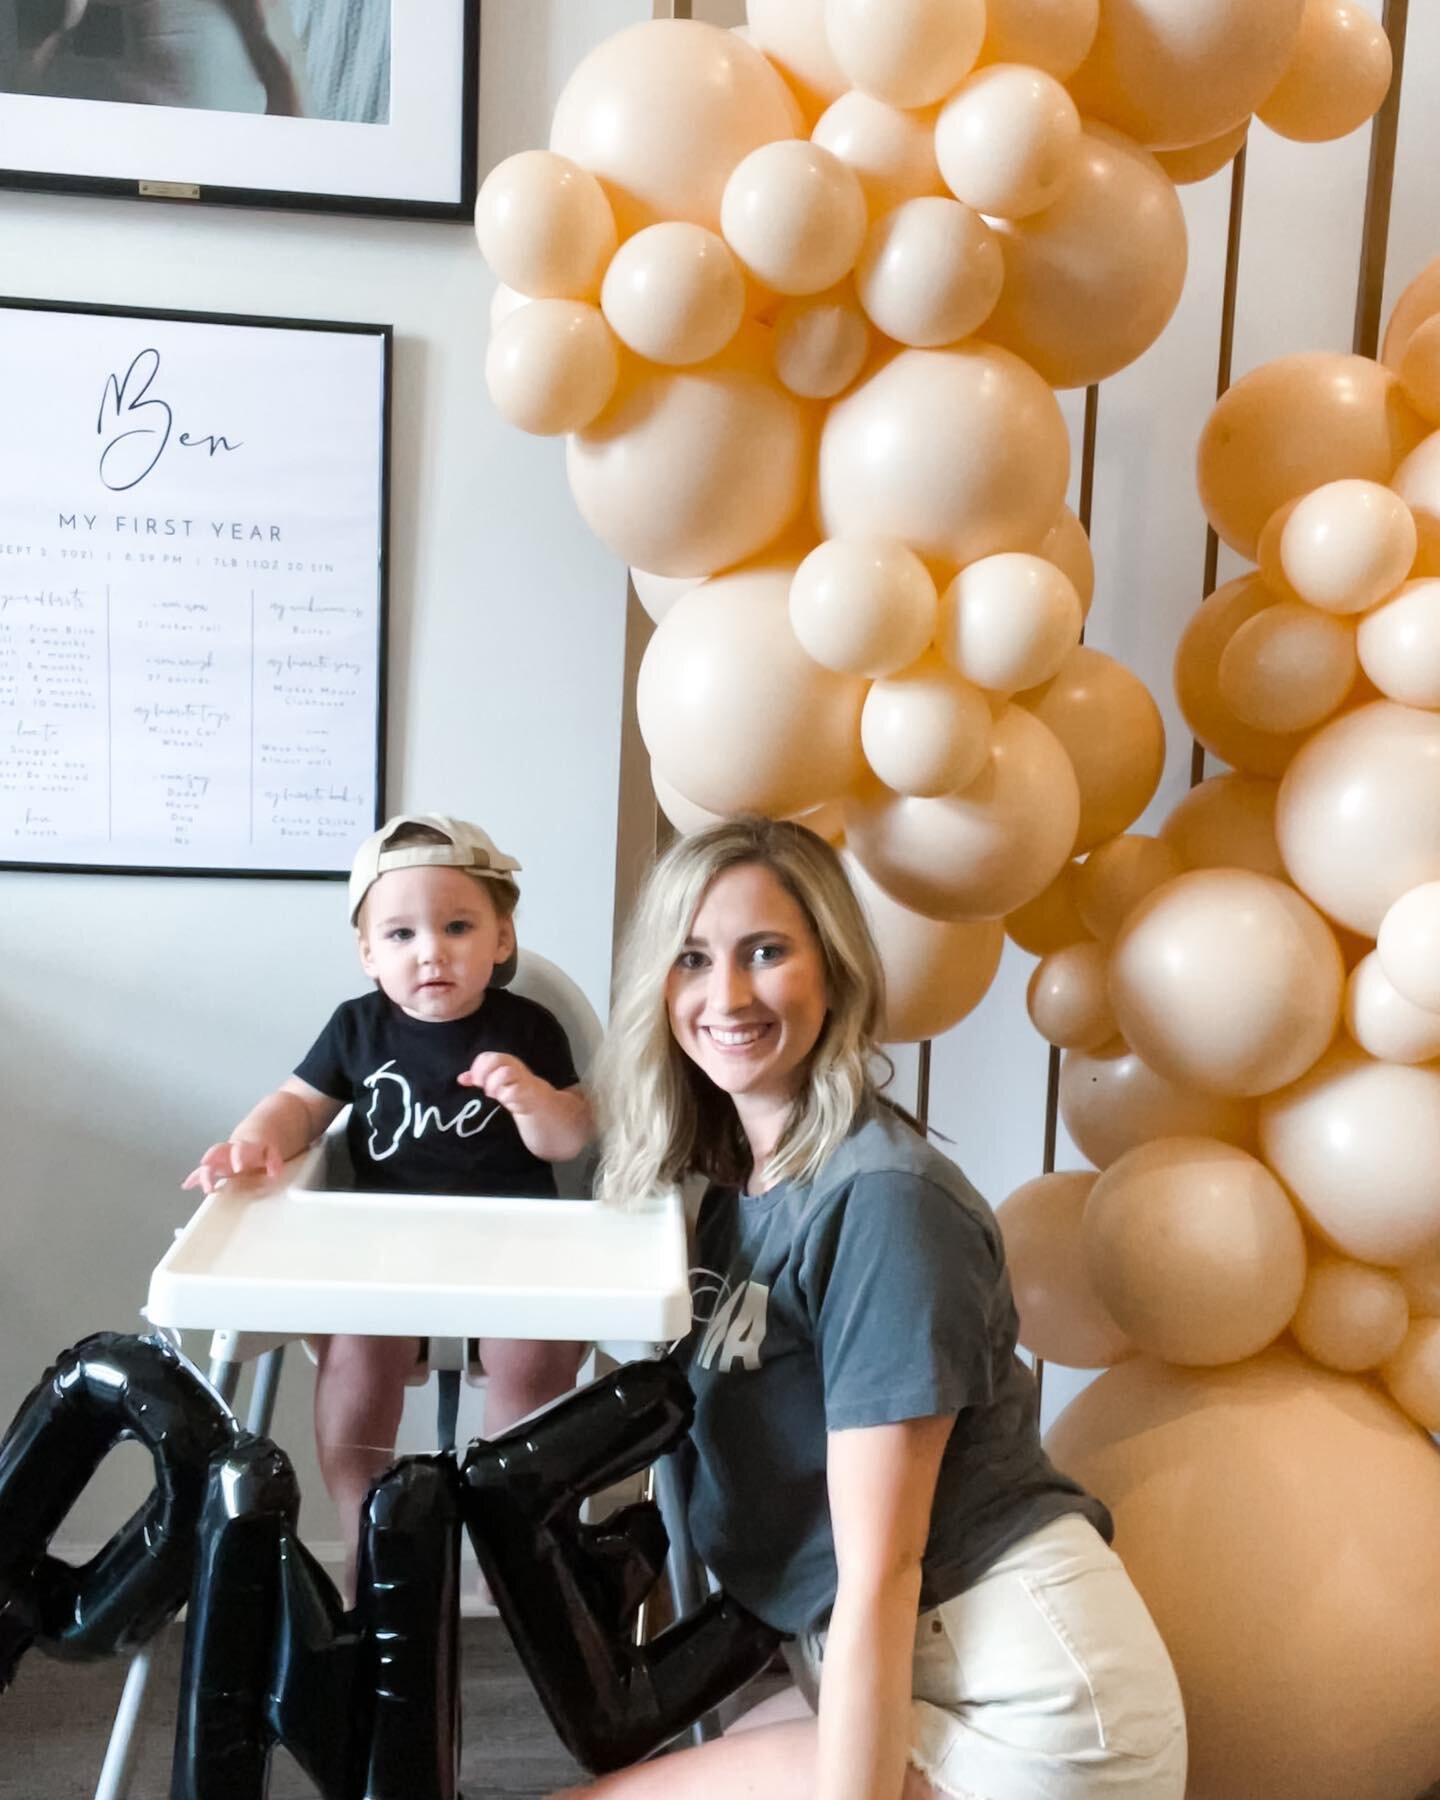 Had so much fun celebrating &ldquo;Ben&rsquo;s big ONE&rdquo; with some friends and family this weekend 🖤
.
.
.
.
Balloon arch: @adornfloraldesign
Cookies/Crown: @midwestcookieco
Signs: @etsy
Smash cake: @dolcebakery 
.
Disclaimer: All decor inspo i